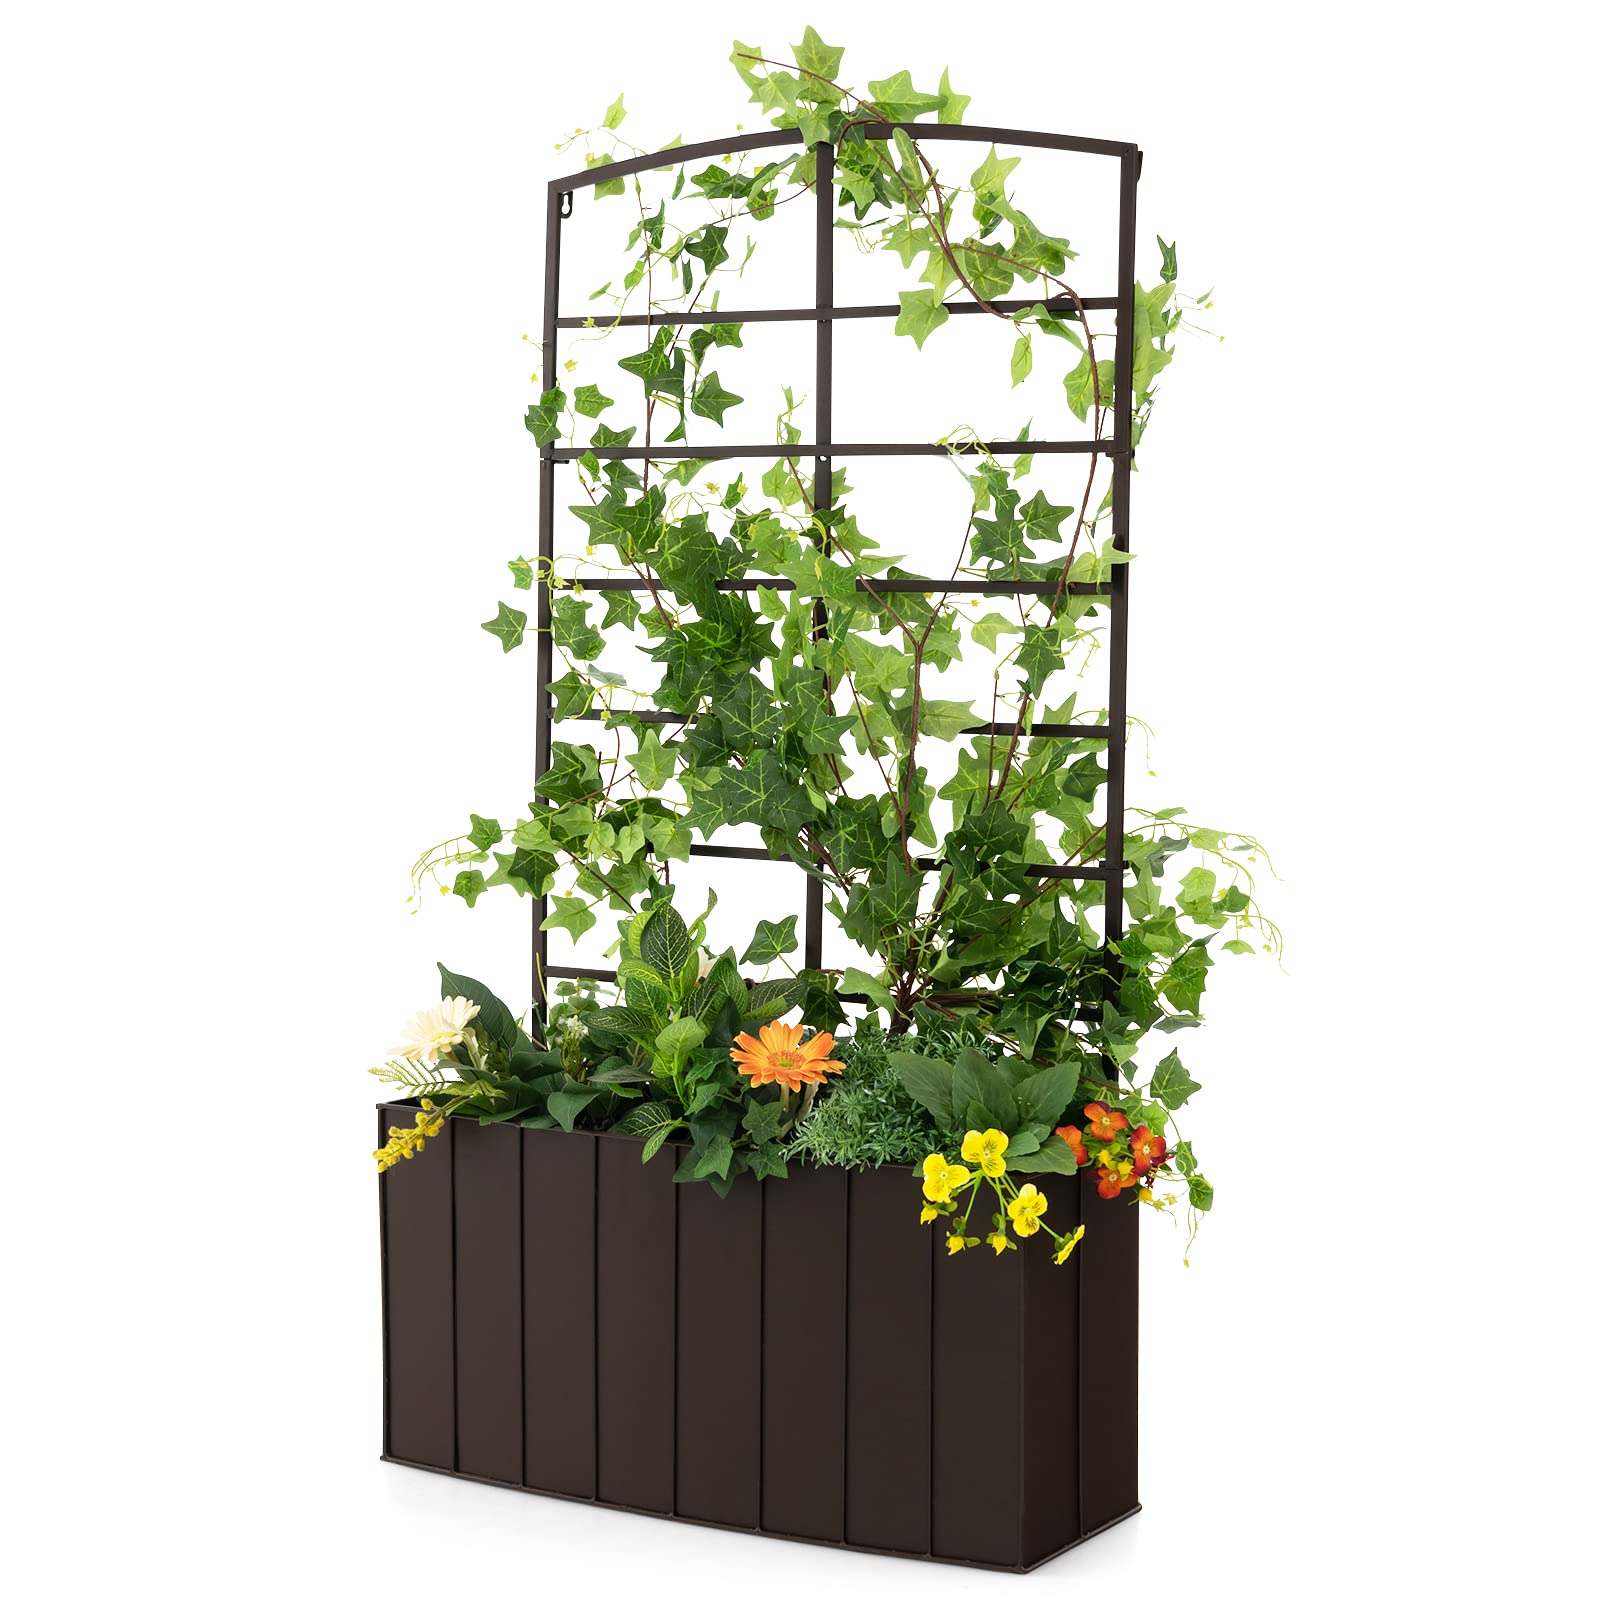 Giantex Raised Garden Bed with Trellis, Vertical Bed Box with Lattice for Vine Flowers Climbing or Hanging